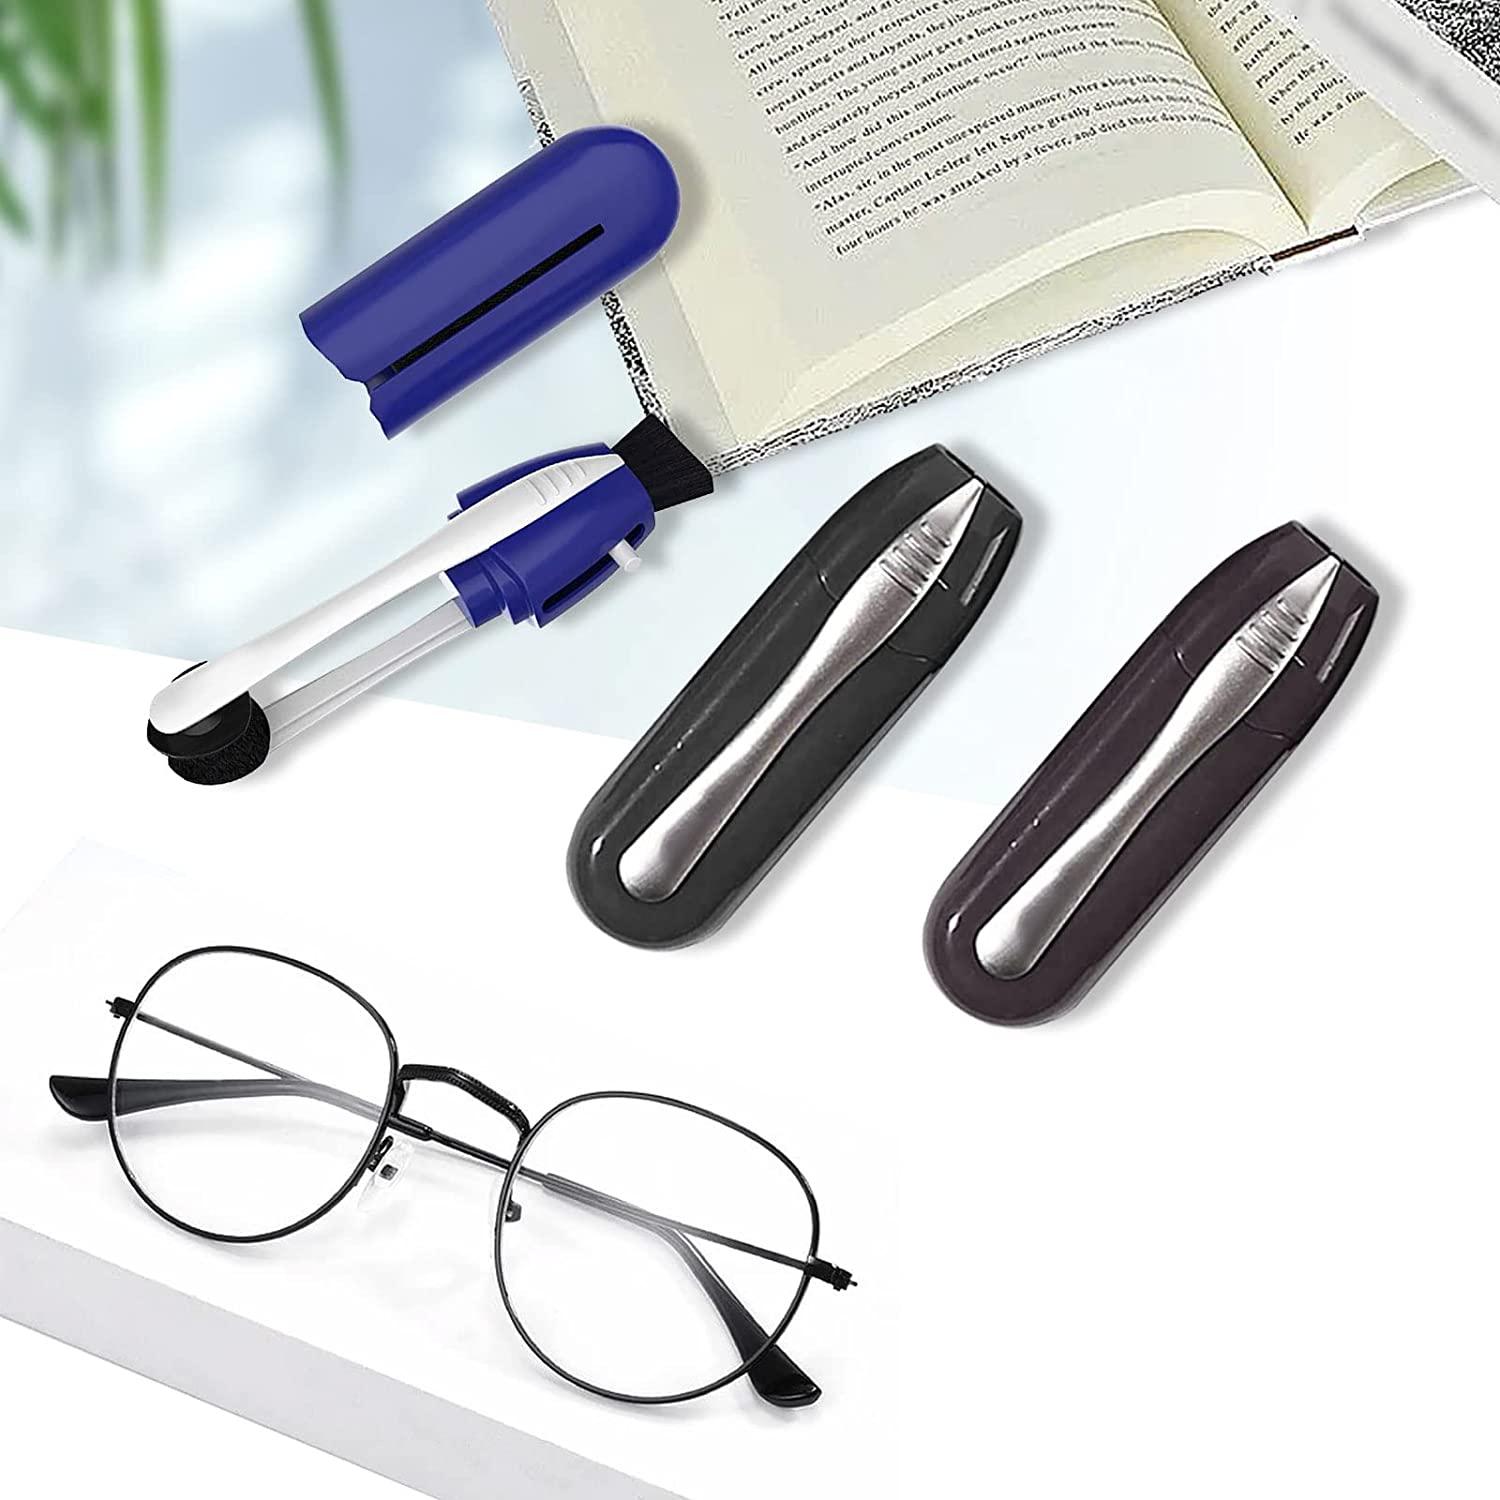 Glasses Cleaning Kit(3pc), Eye Glass Cleaner Lens Cleaner Scratch Remover  for Eyeglasses, Microfiber Spectacles Portable Carbon Eyeglasses Cleaner,  Efficient and Durable Carbon Microfiber Technology